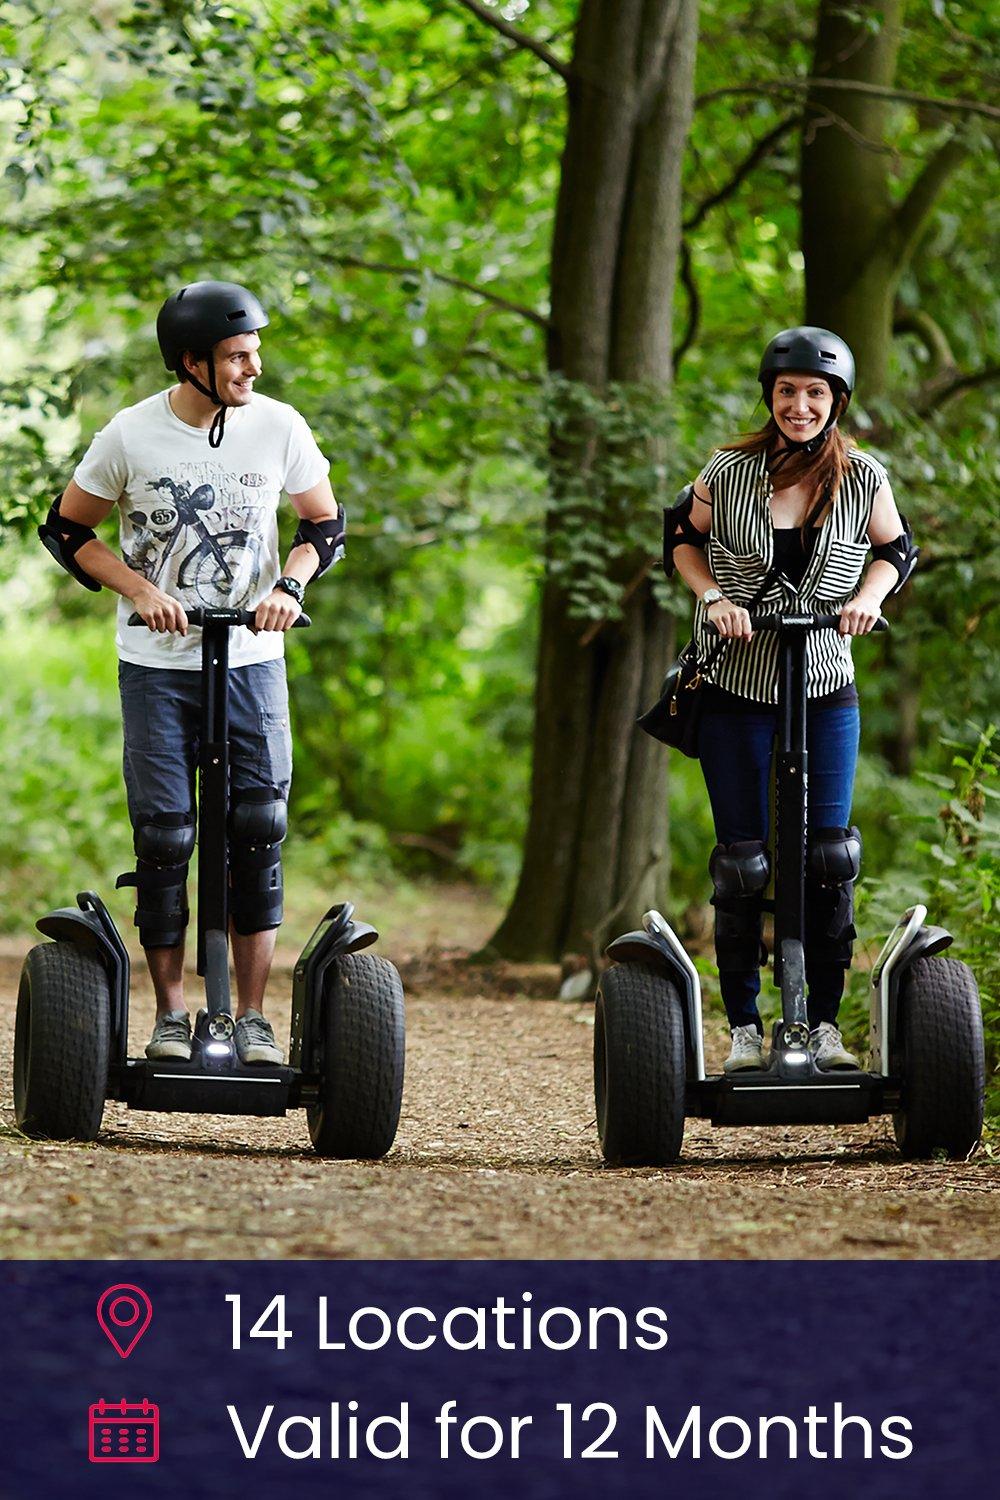 Segway Thrill for Two Gift Experience